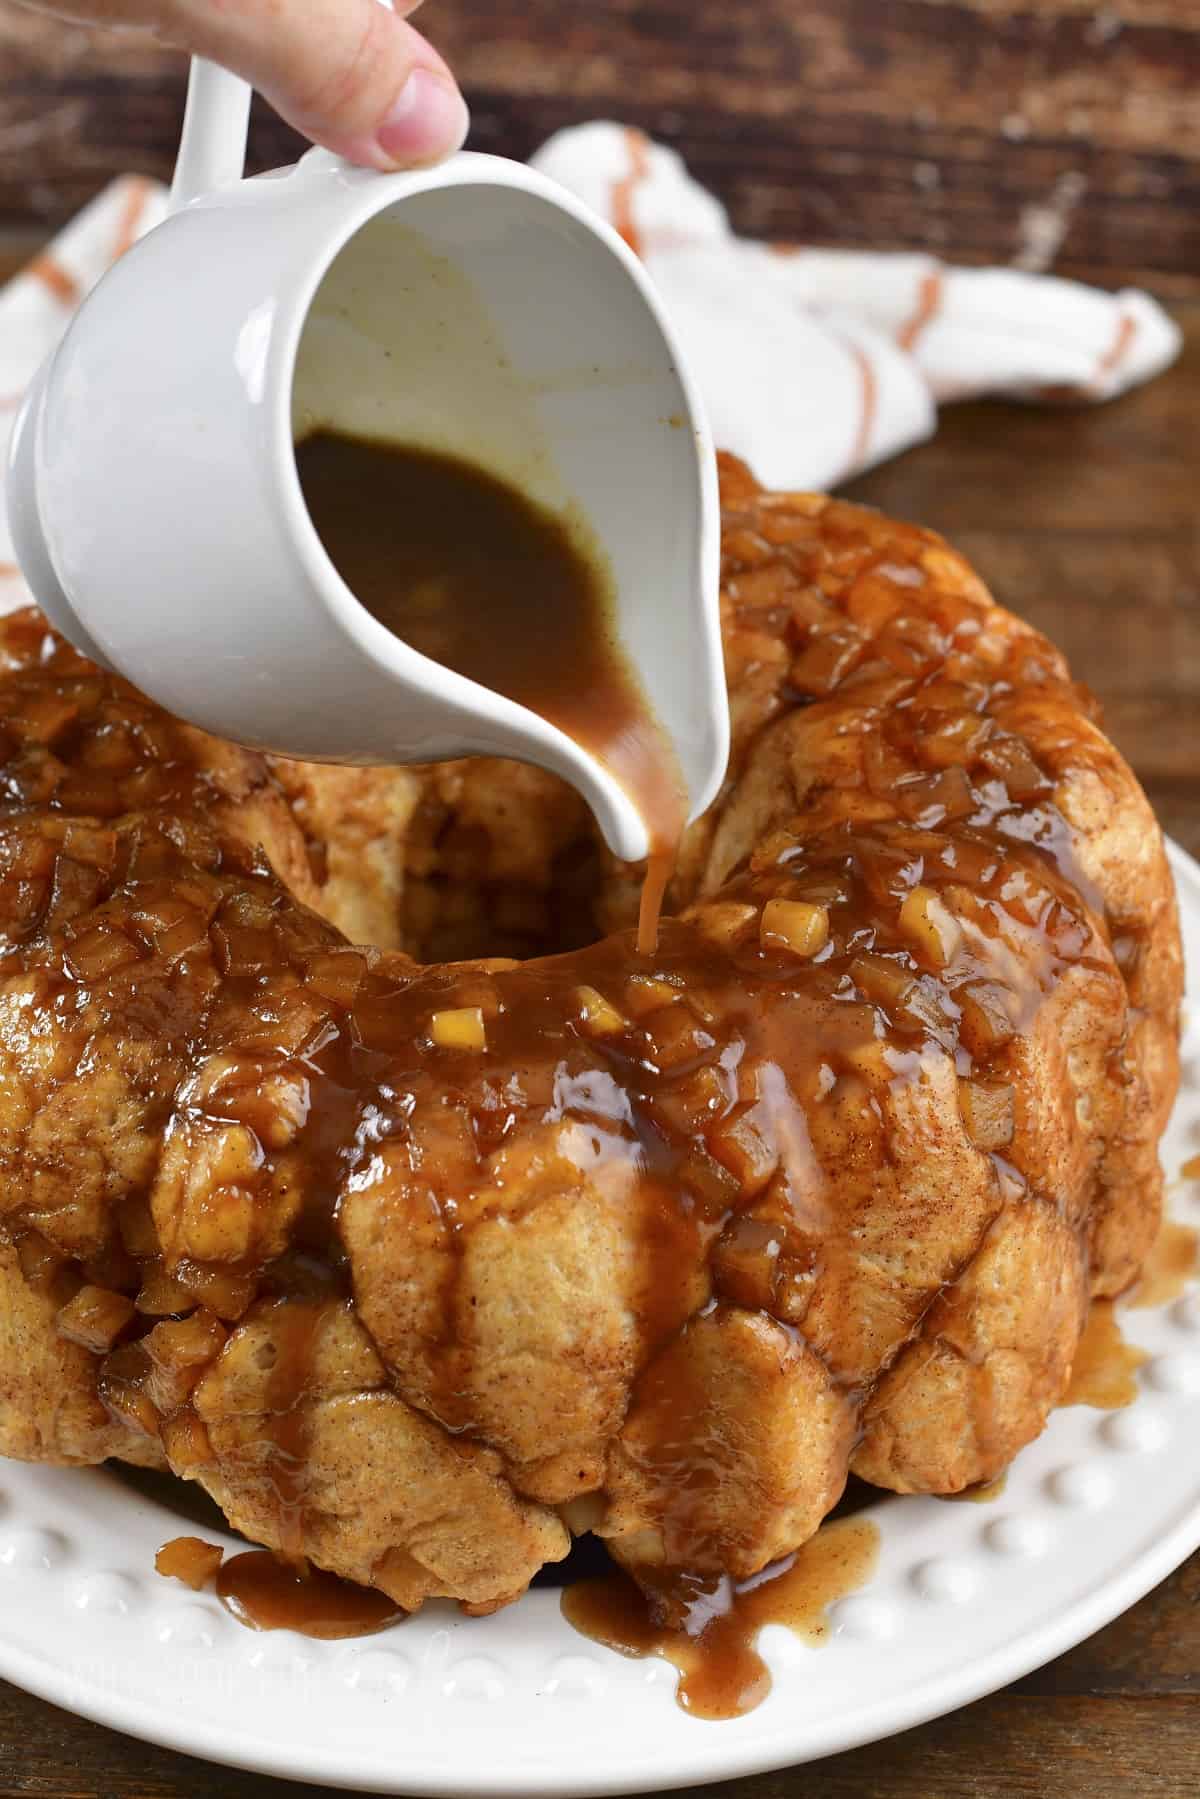 pouring sauce over the monkey bread on the plate.